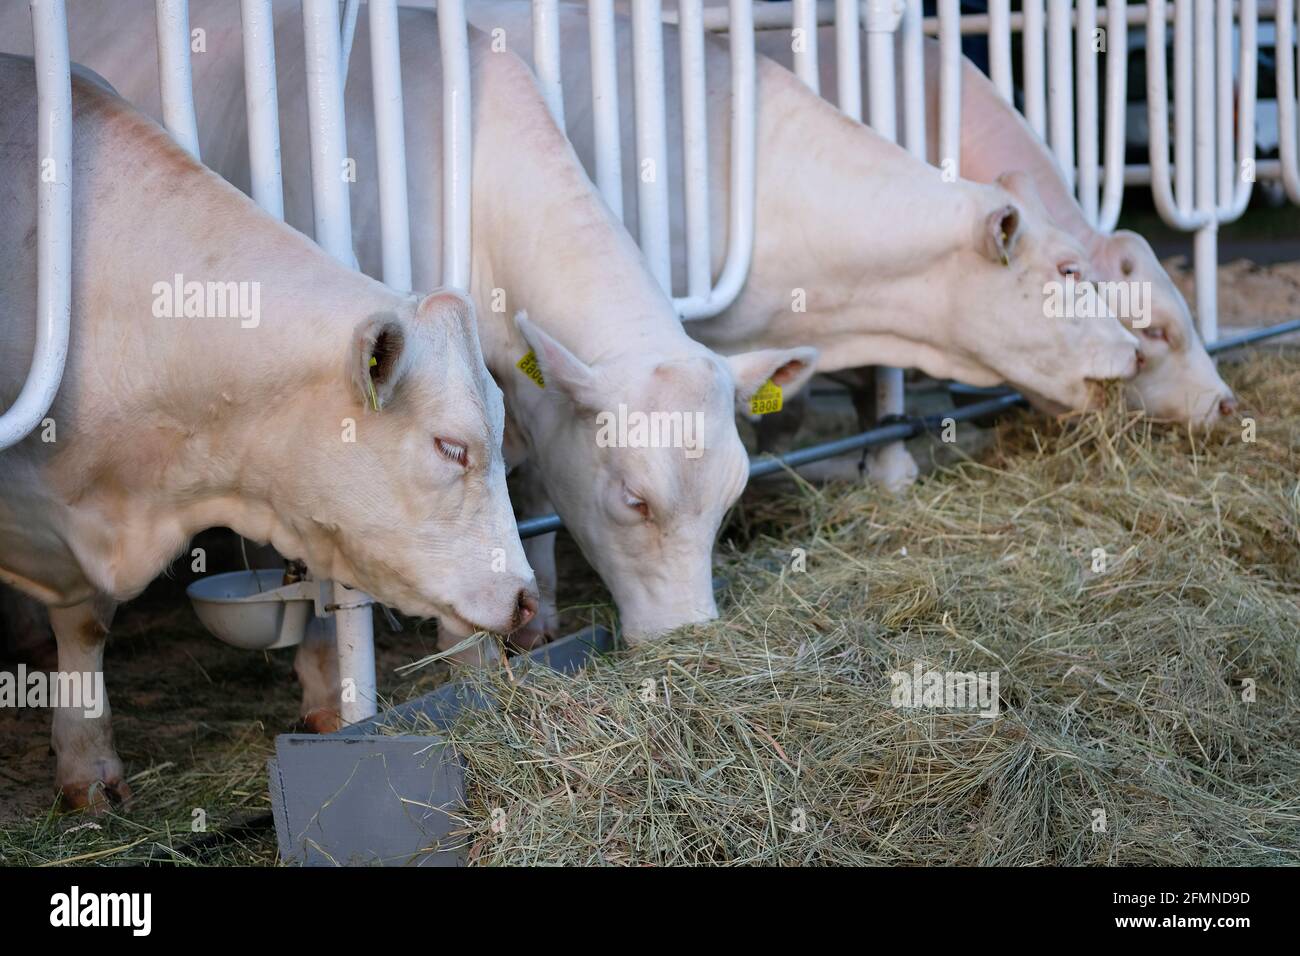 Cows eating fresh hay on farm. Concept of agriculture, farming and livestock Stock Photo